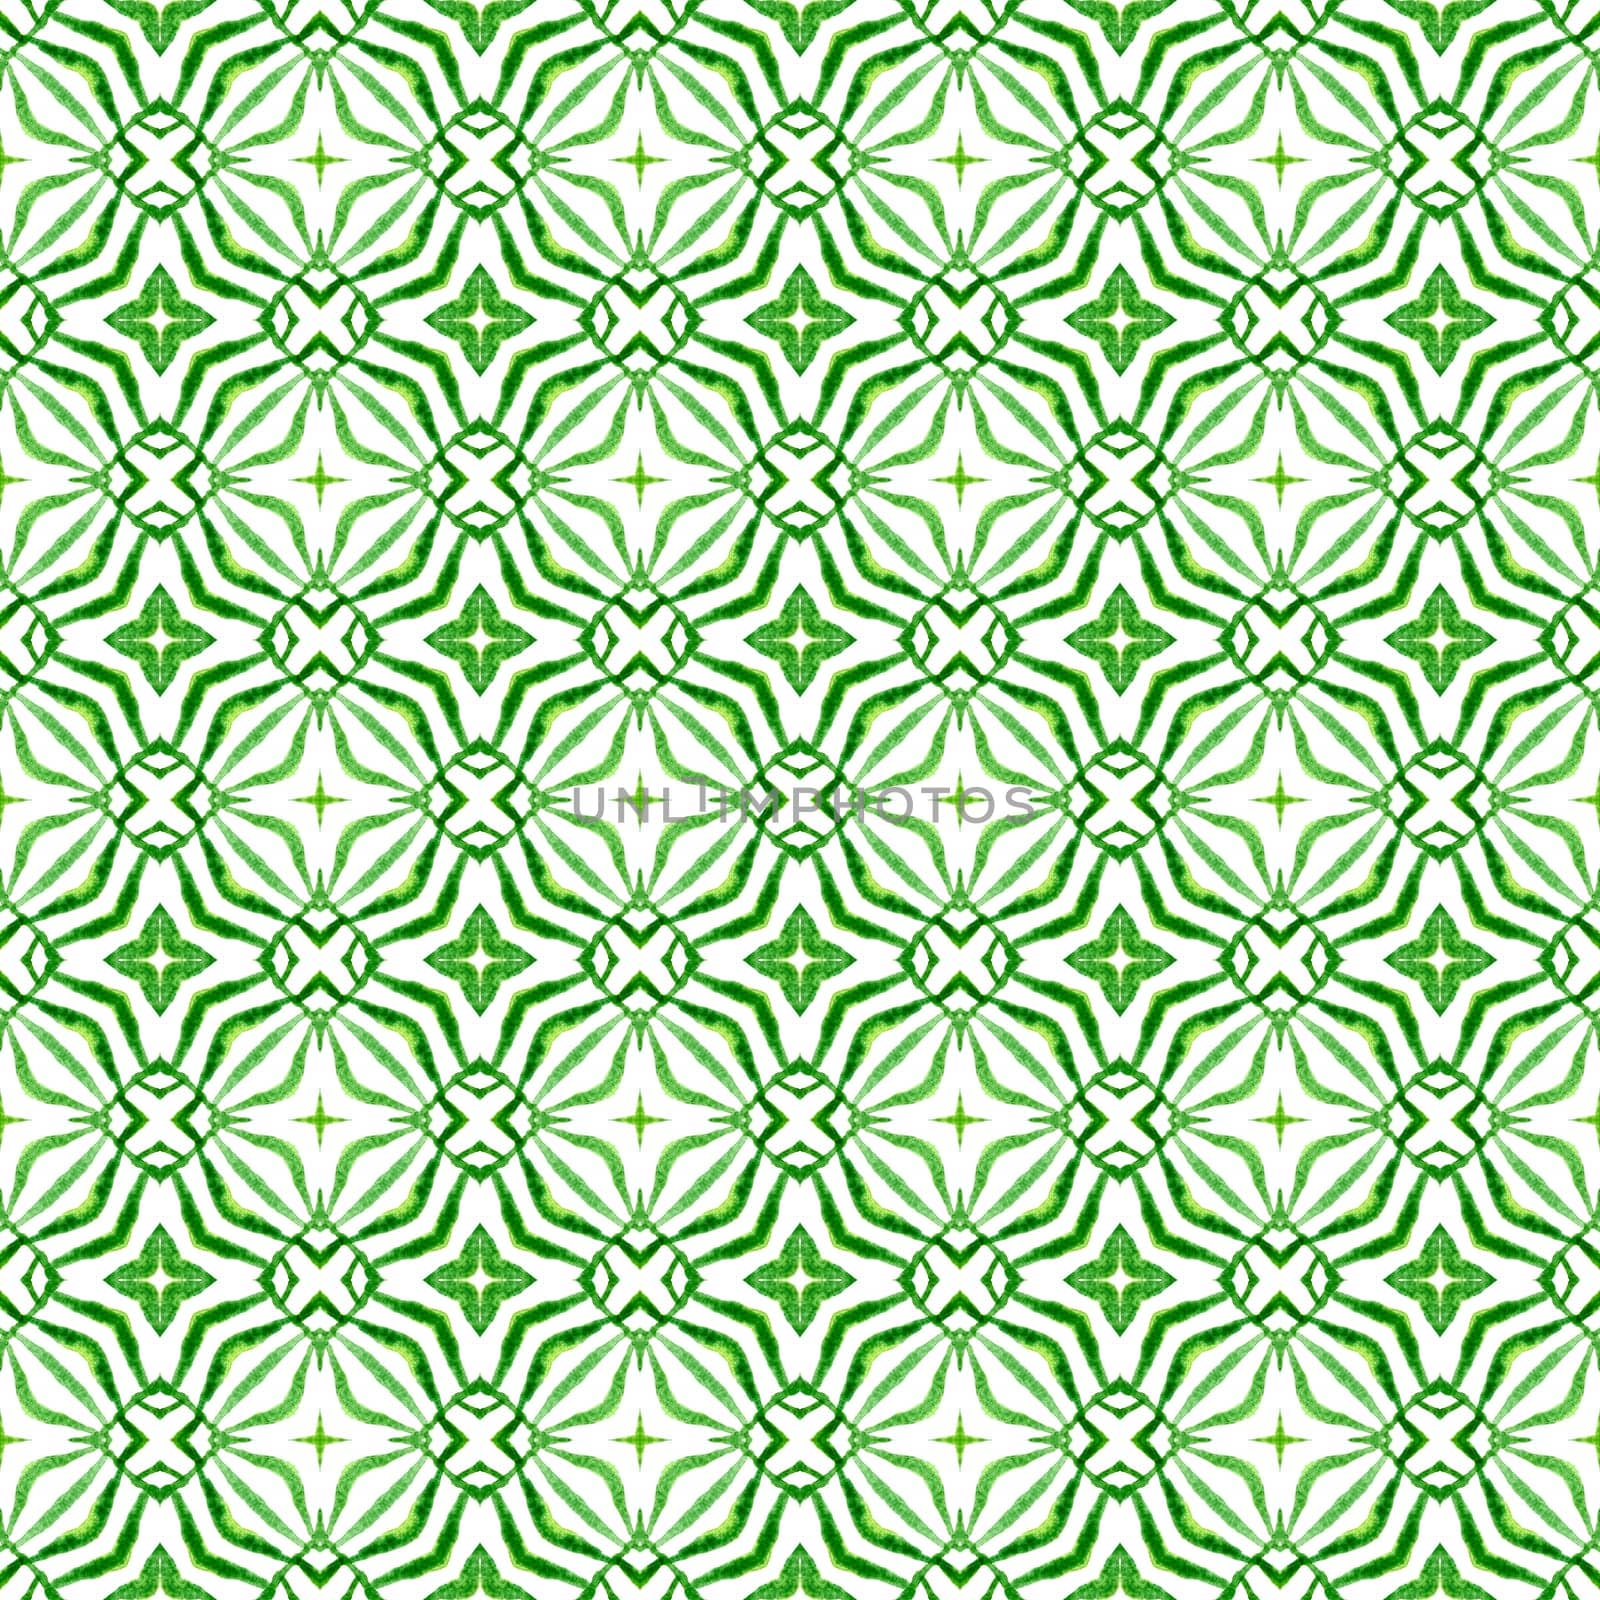 Tropical seamless pattern. Green breathtaking boho chic summer design. Hand drawn tropical seamless border. Textile ready overwhelming print, swimwear fabric, wallpaper, wrapping.